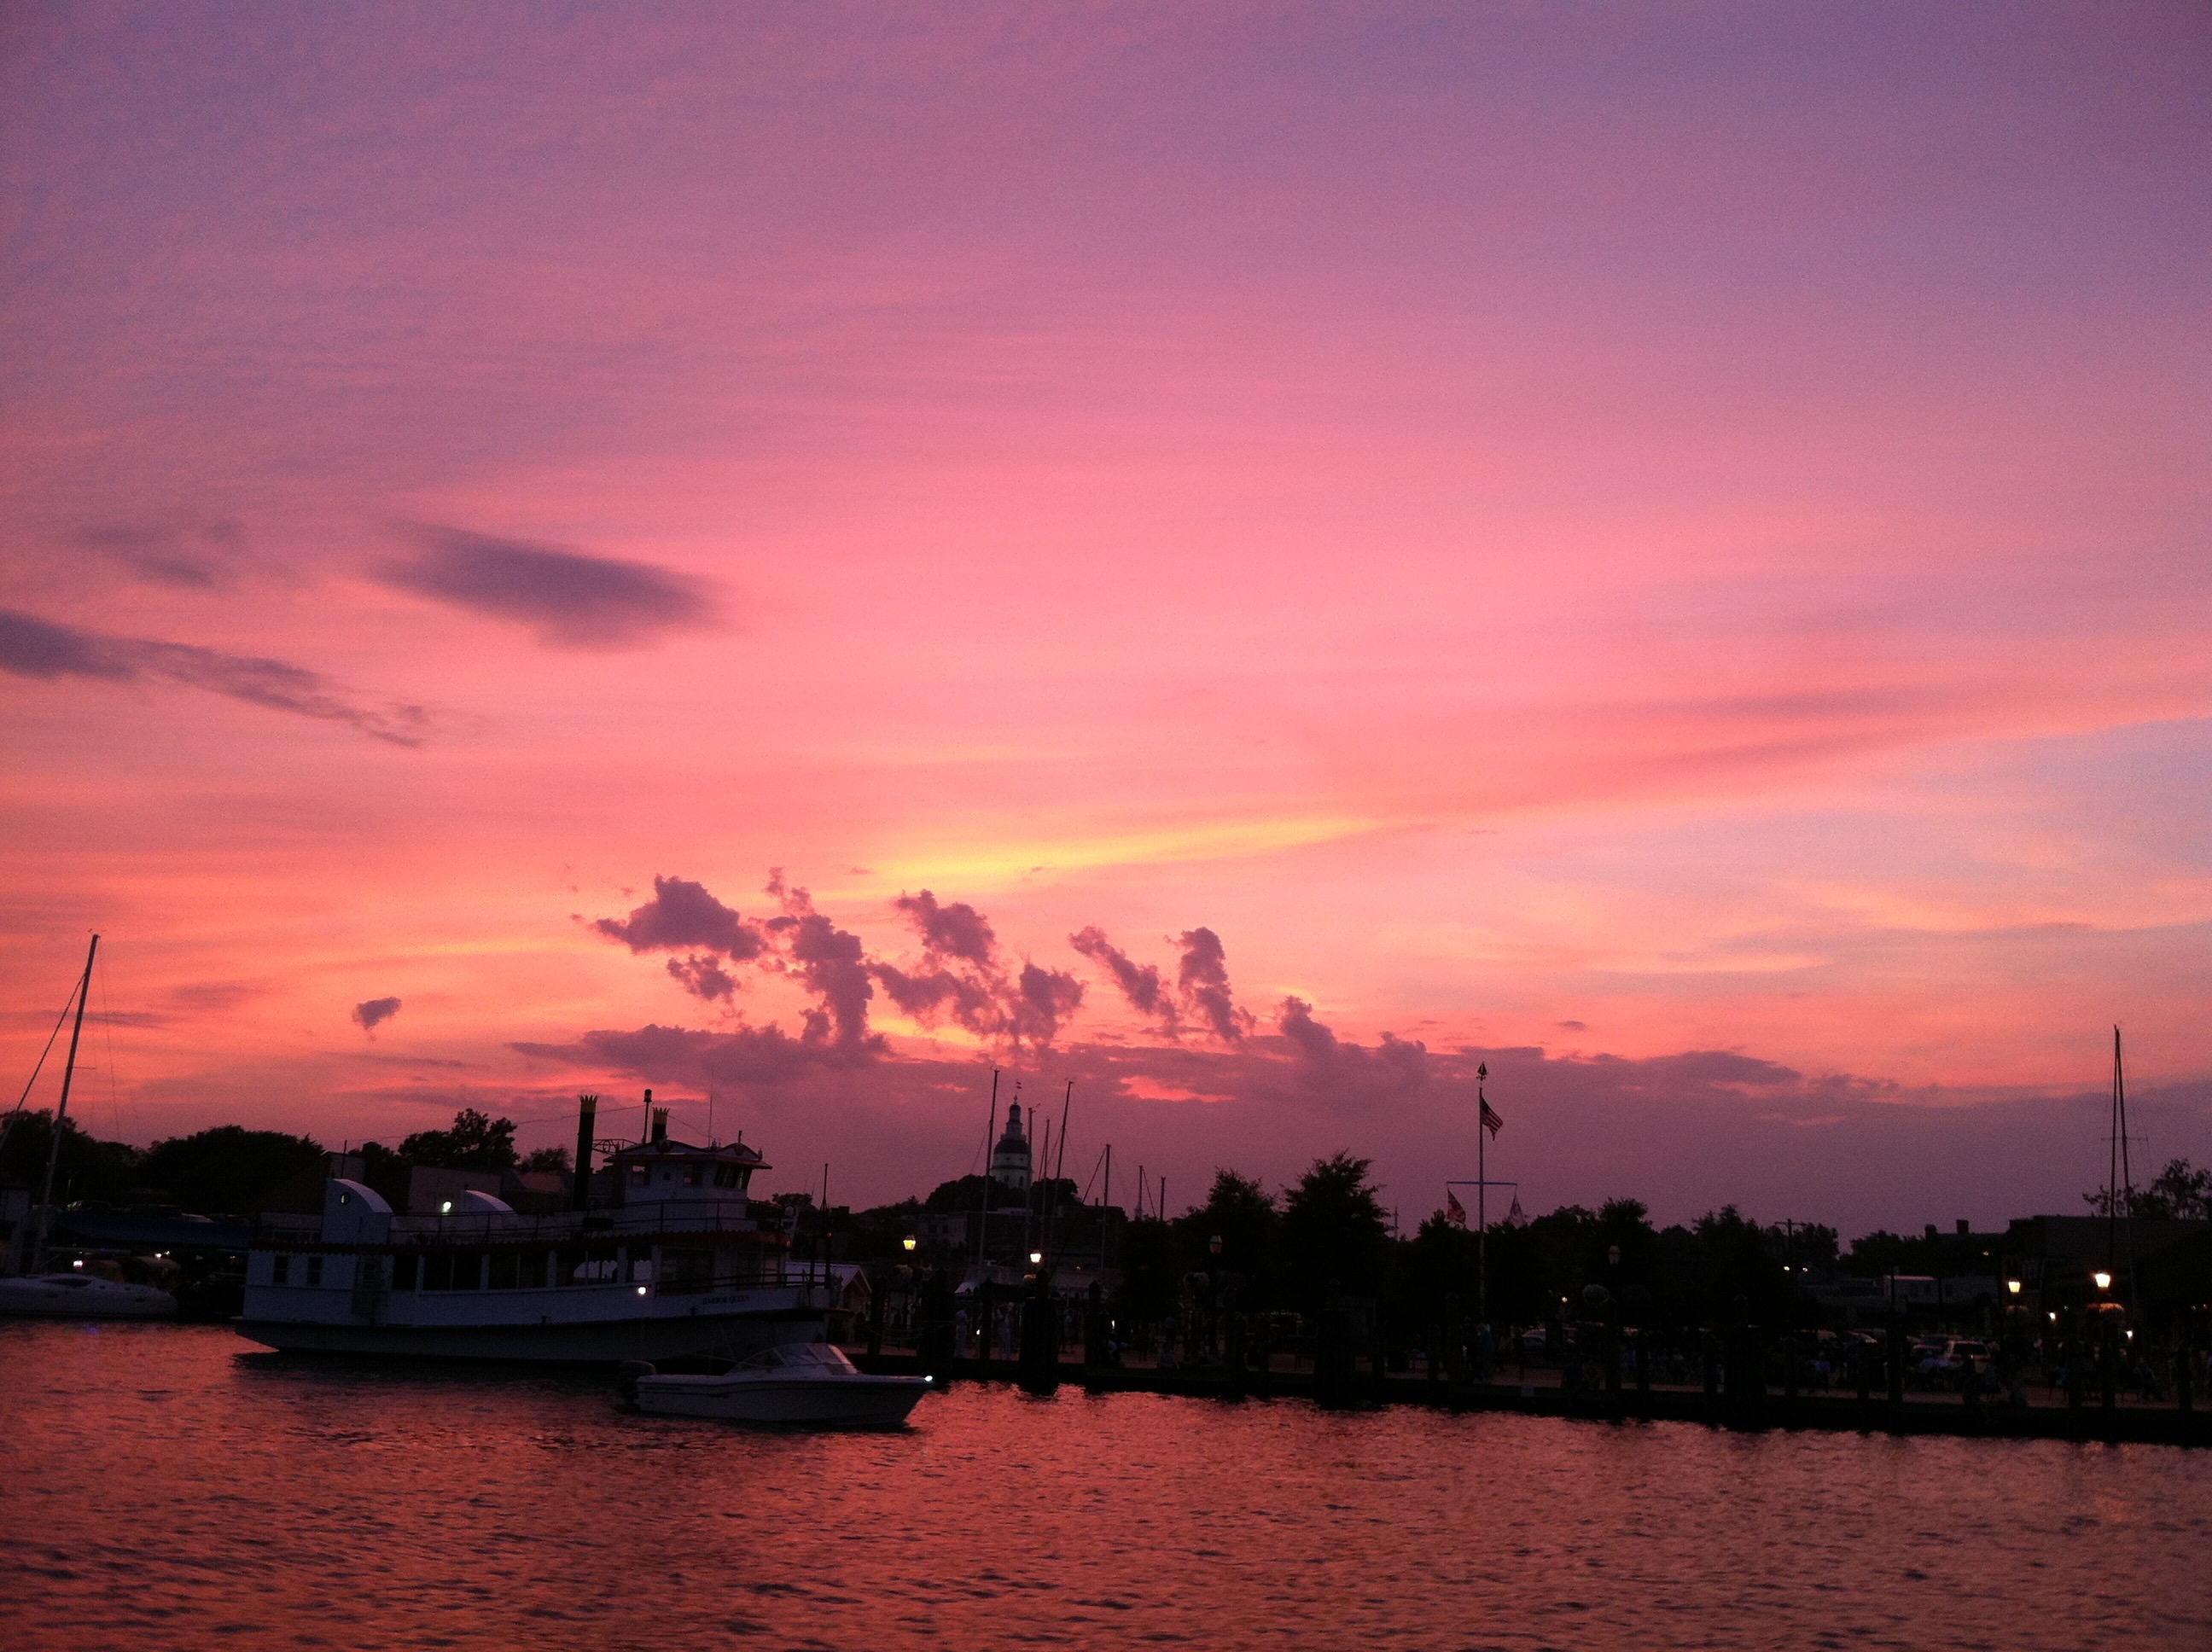 Annapolis skyline and water turned purple in sunset and silhouetting masts